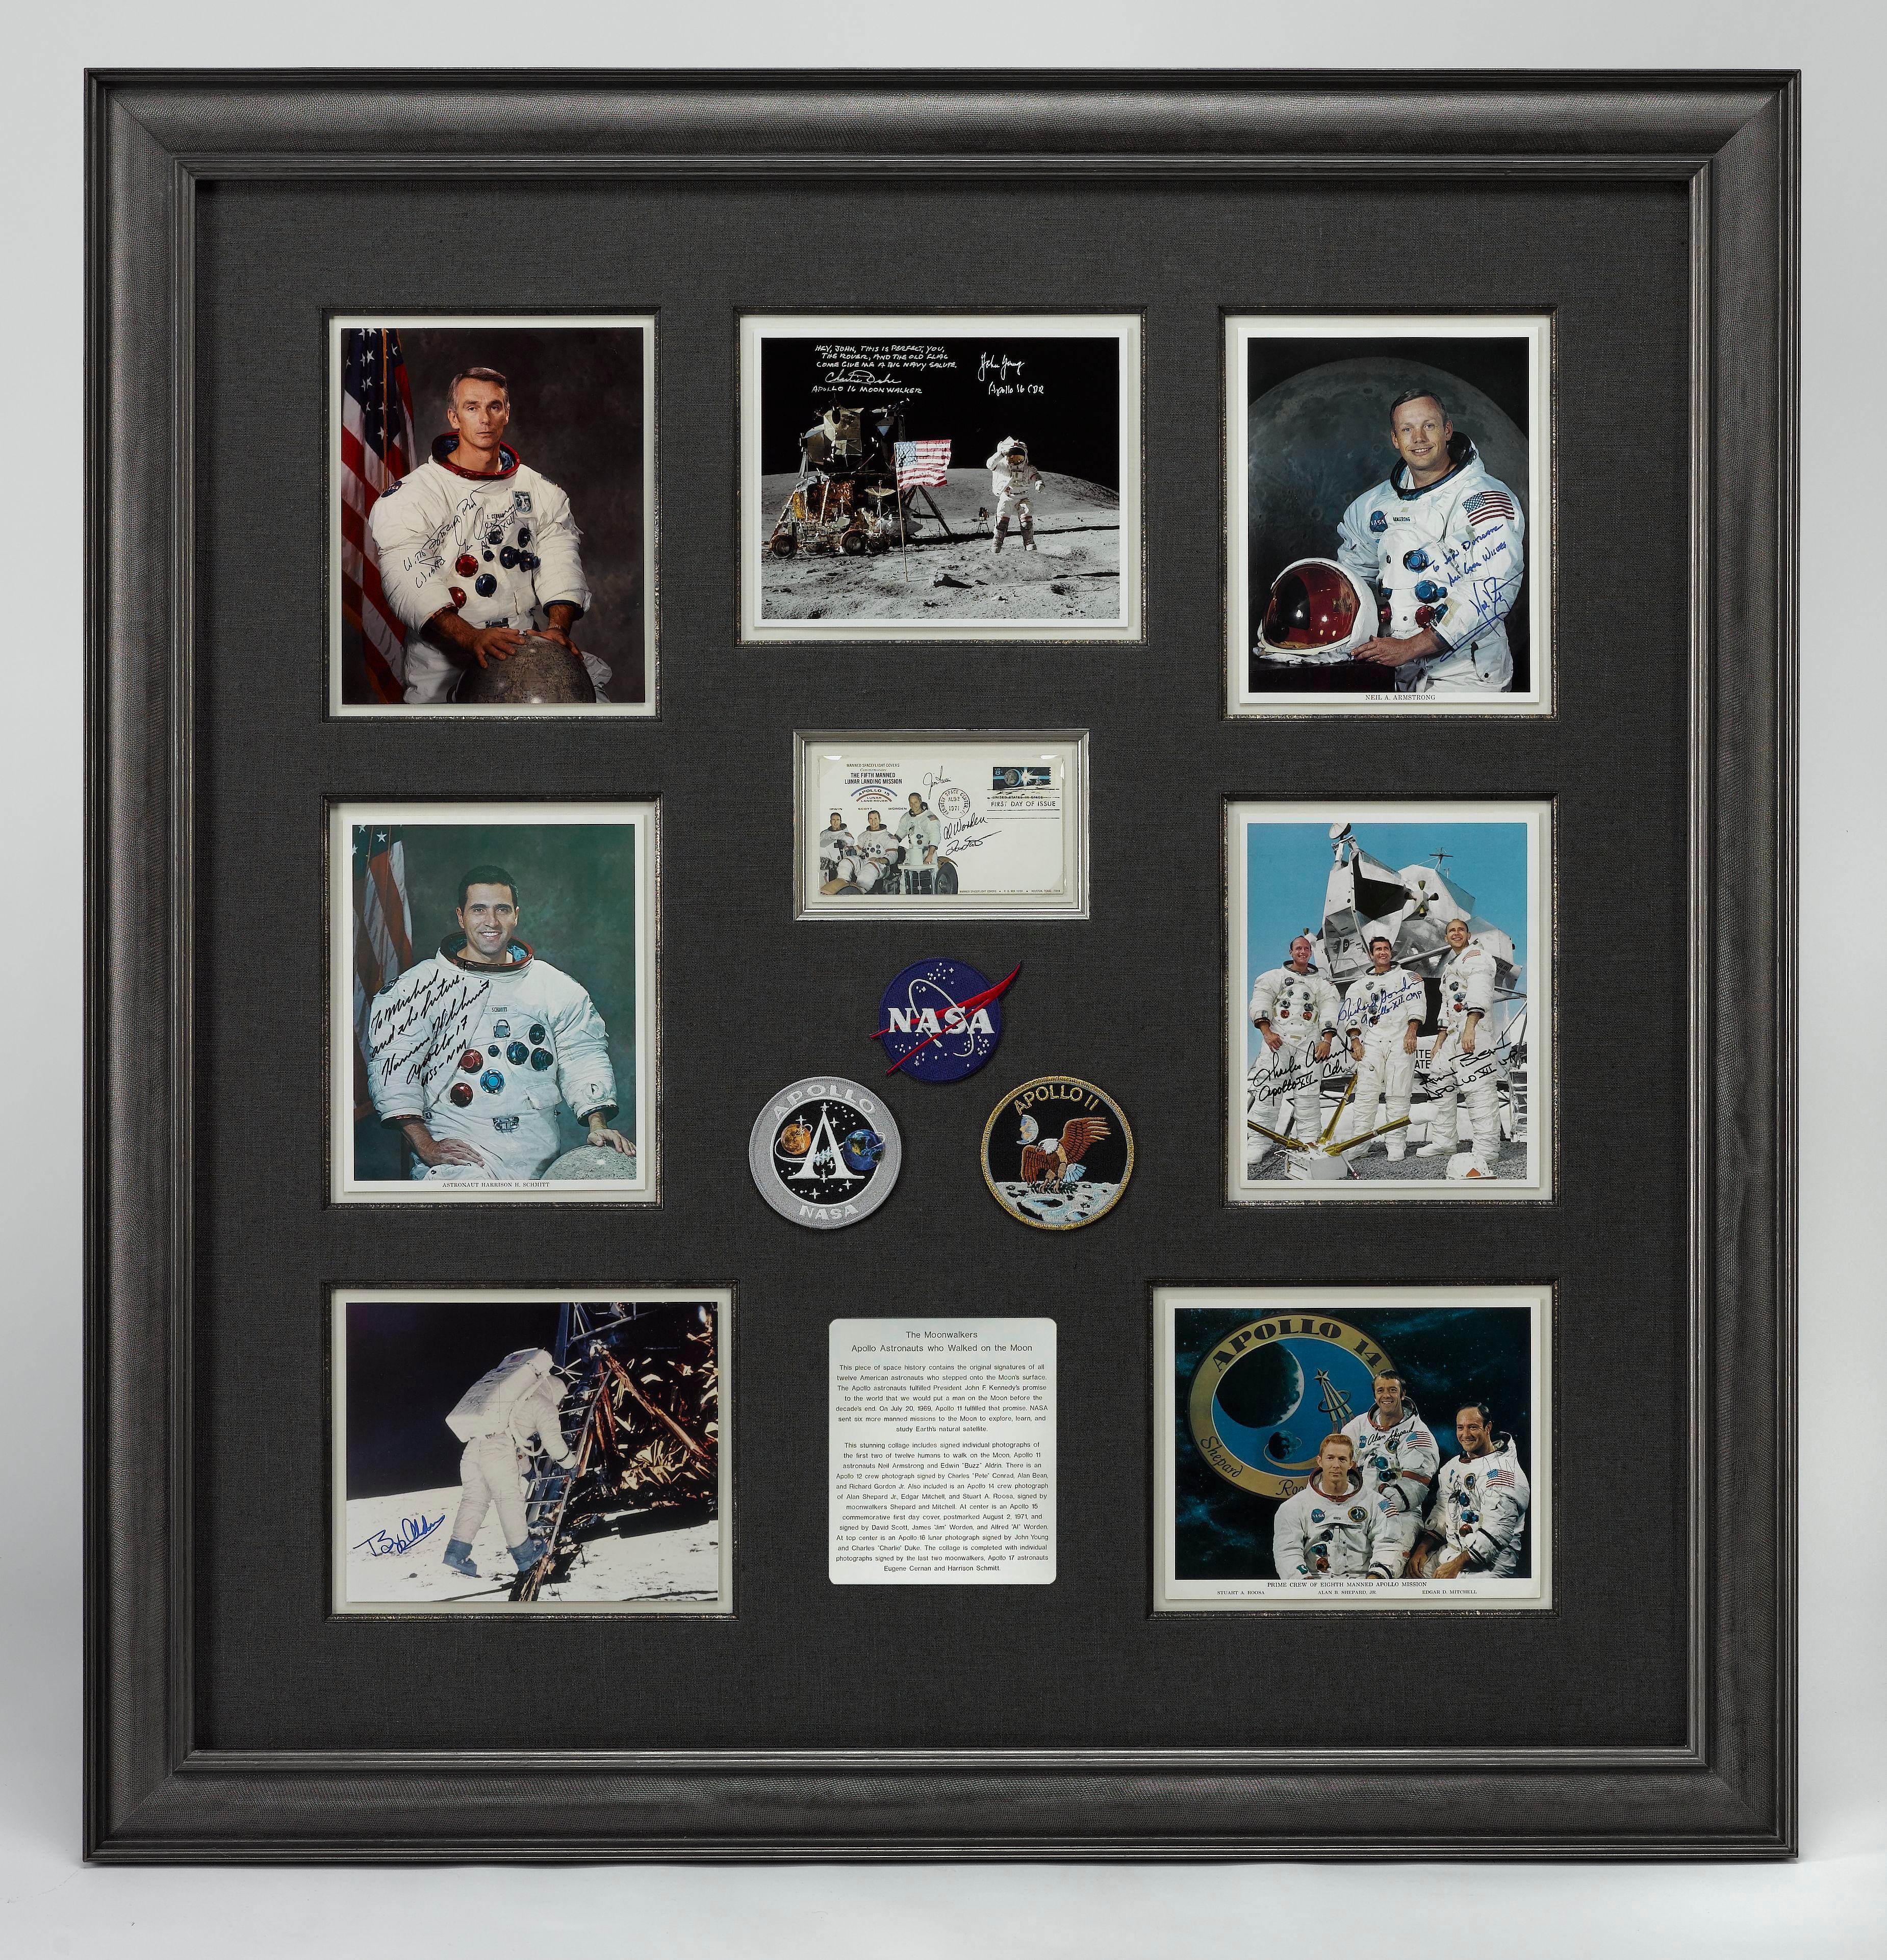 Presented is this stunning Moonwalkers Autographed Collage, celebrating the hard work, bravery, and courage of the 12 men who have walked on the Moon's surface.

The collage is made up of the following elements (listed from top left to bottom